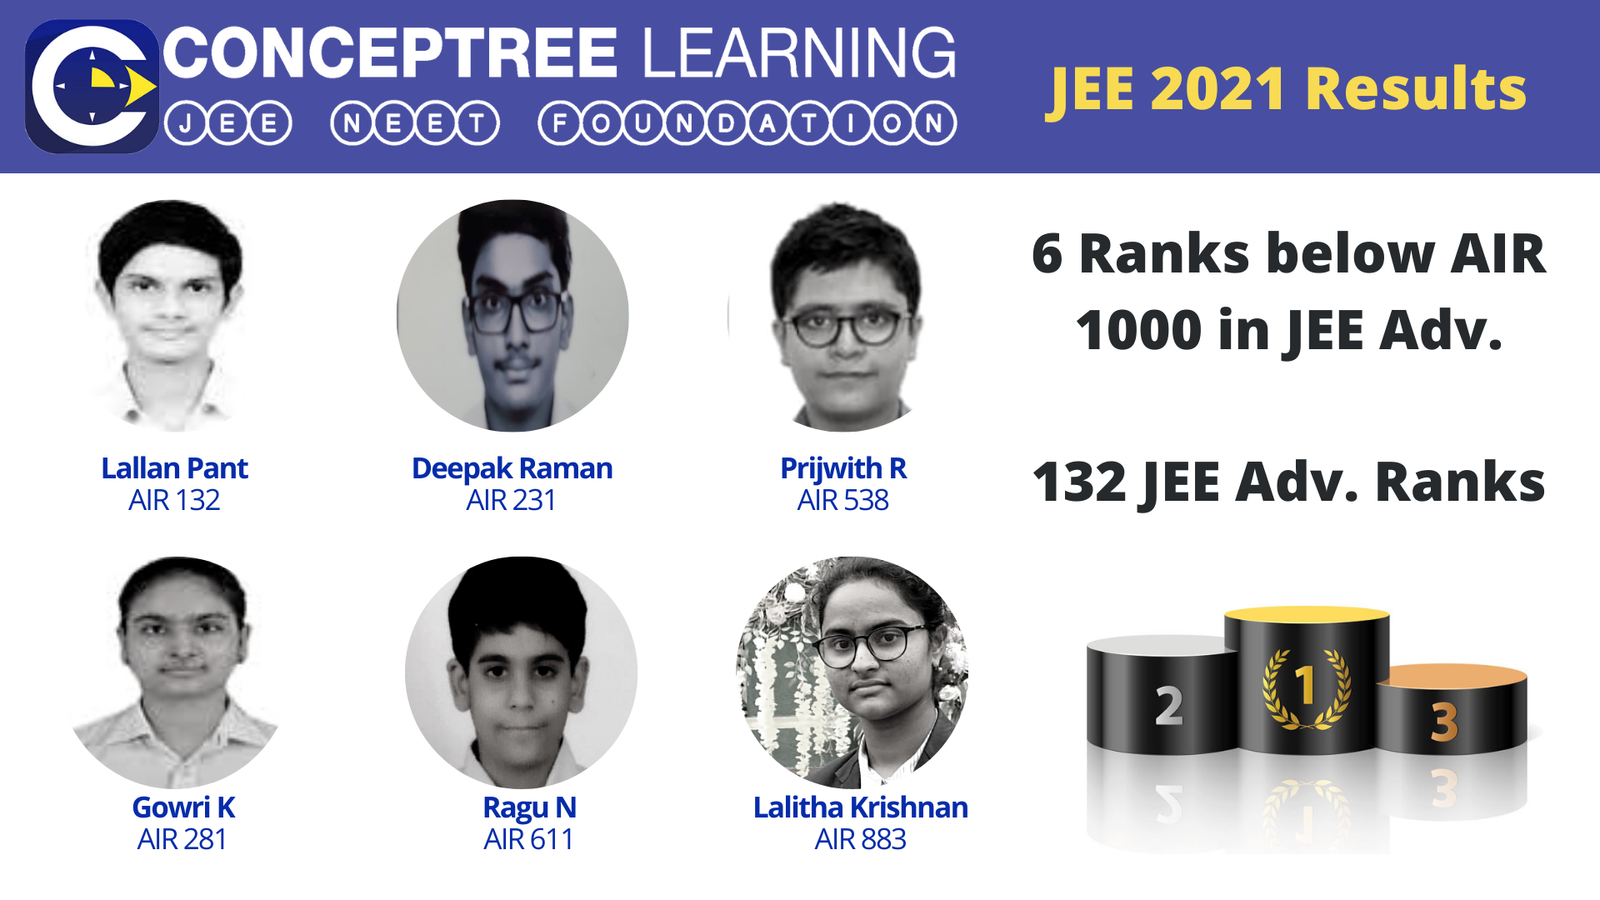 JEE Adv Results-2021 CONCEPTREE Learning